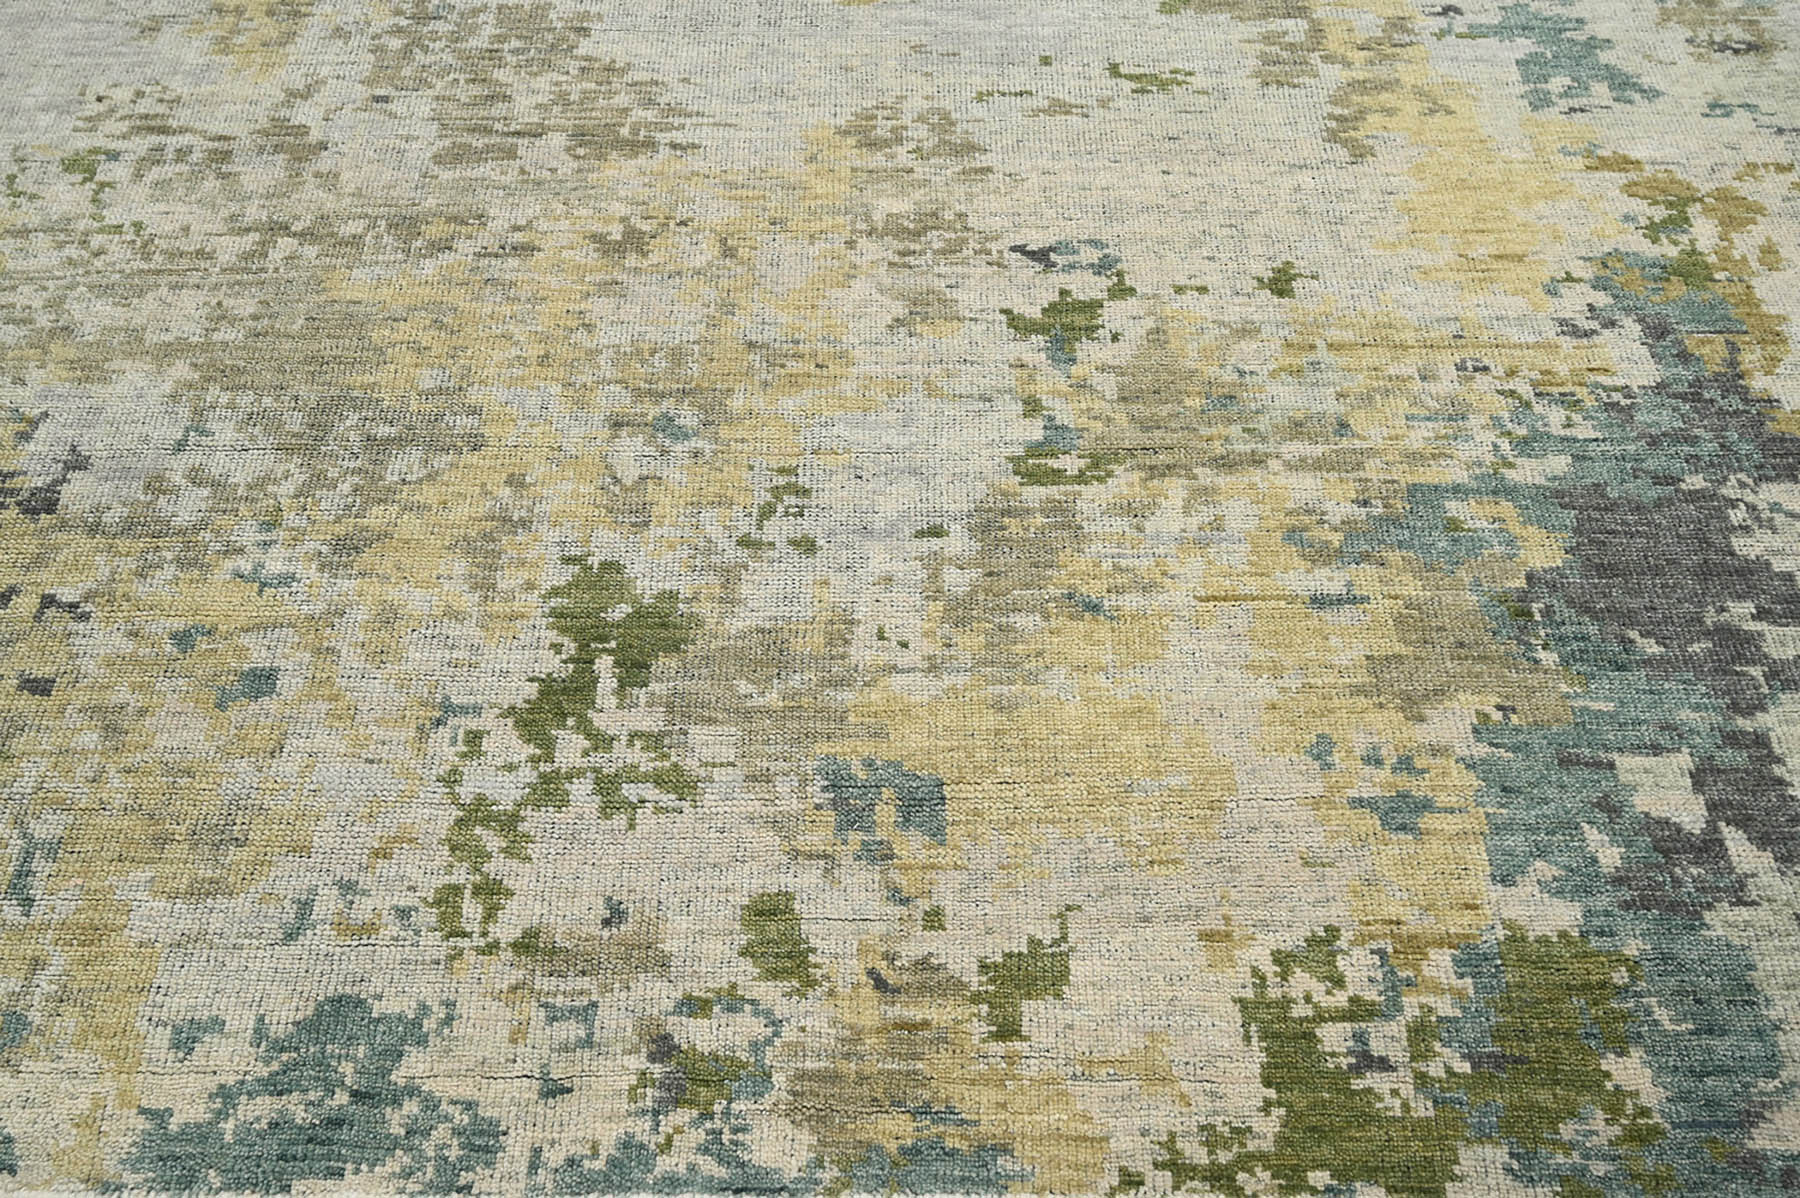 Papouche 8x10 Gray LoomBloom Hand Knotted Modern Abstract Tibetan 100% Wool Oriental Area Rug